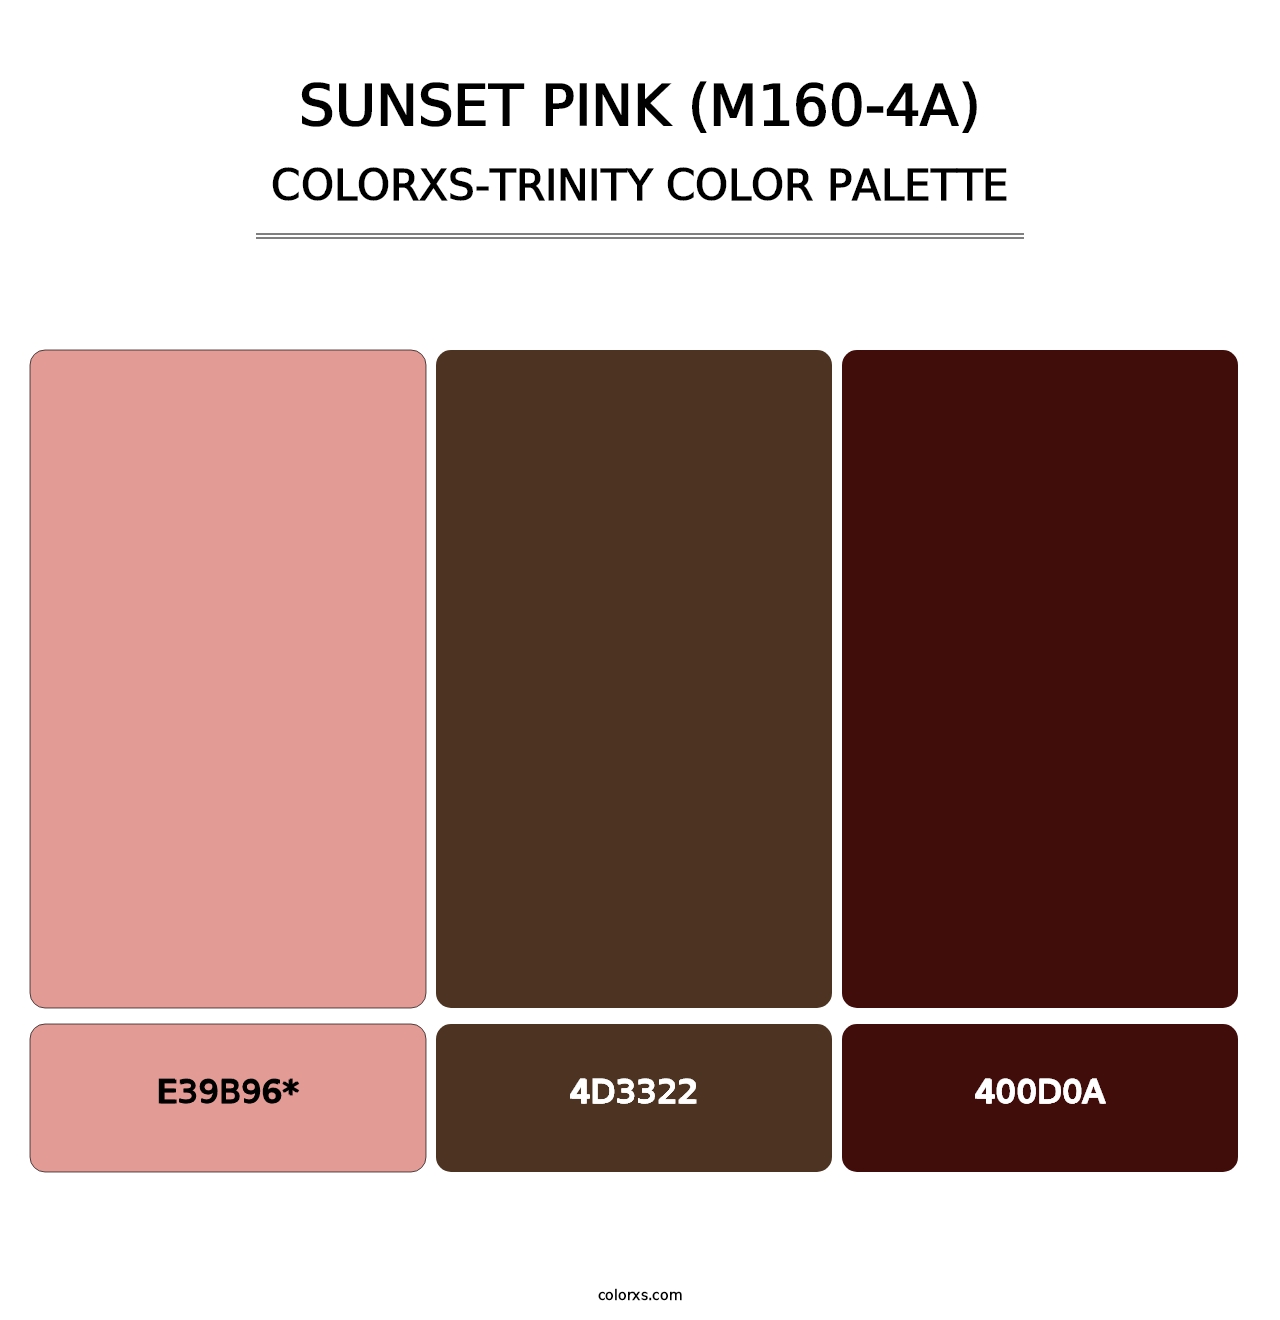 Sunset Pink (M160-4A) - Colorxs Trinity Palette